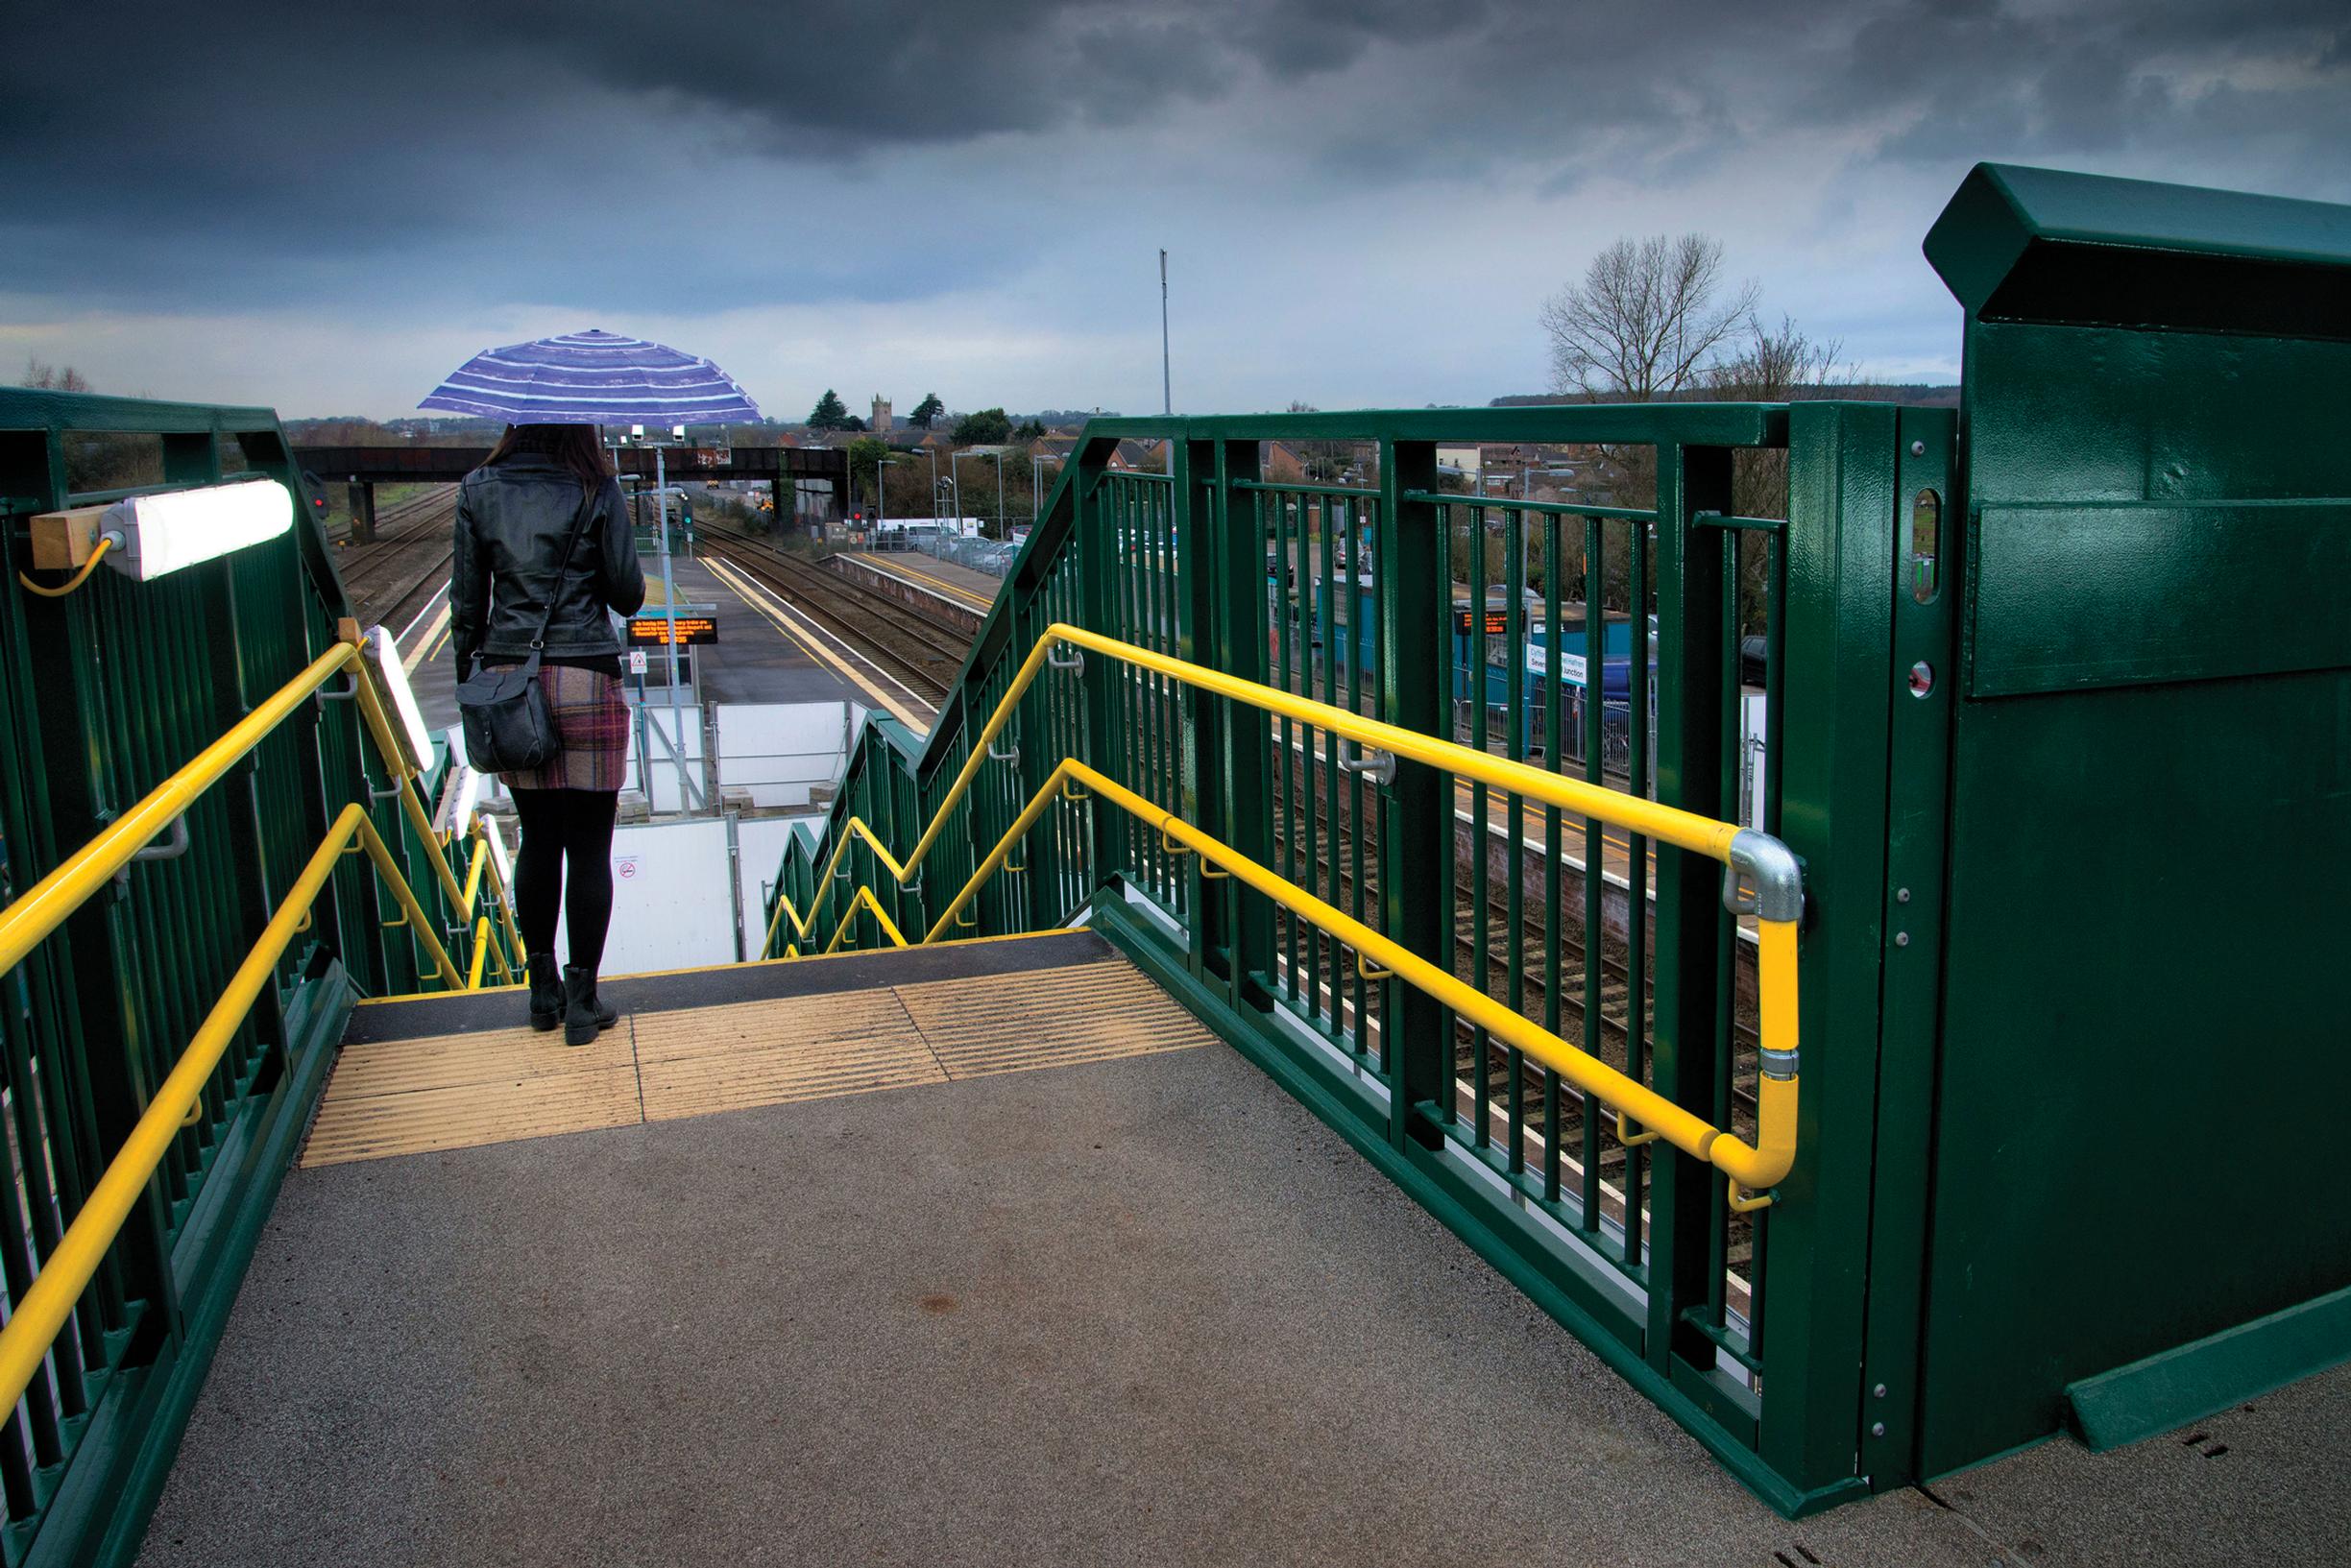 Severn Tunnel Junction station: Designers of the station`s new footbridge failed to consider the security of lone women, says one local resident